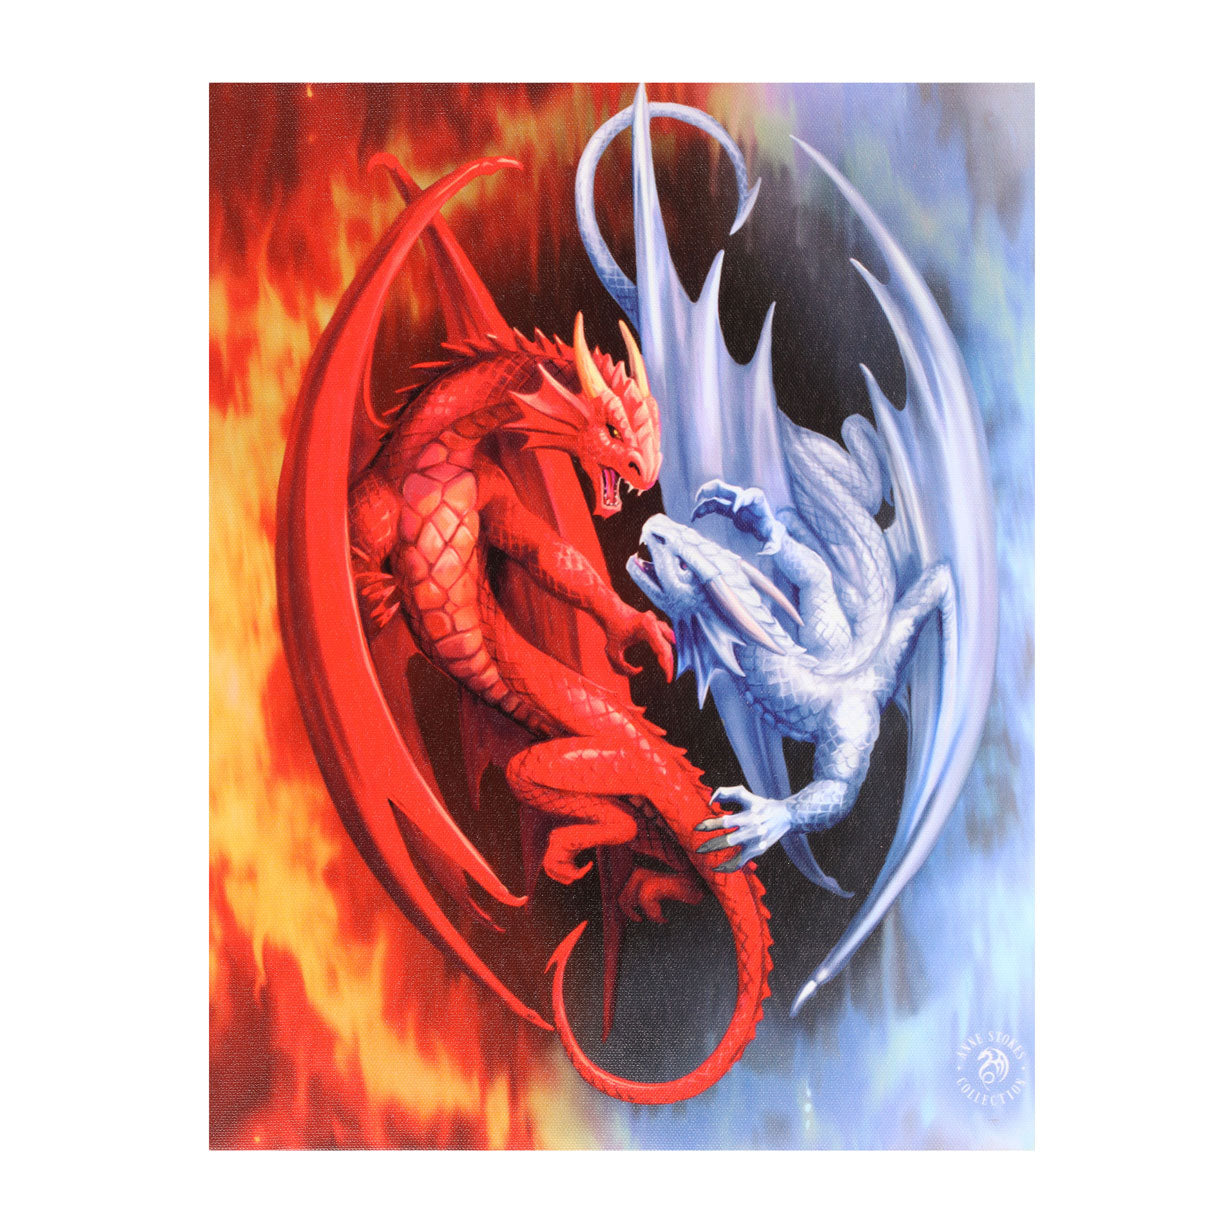 View 19x25cm Fire and Ice Canvas Plaque by Anne Stokes information